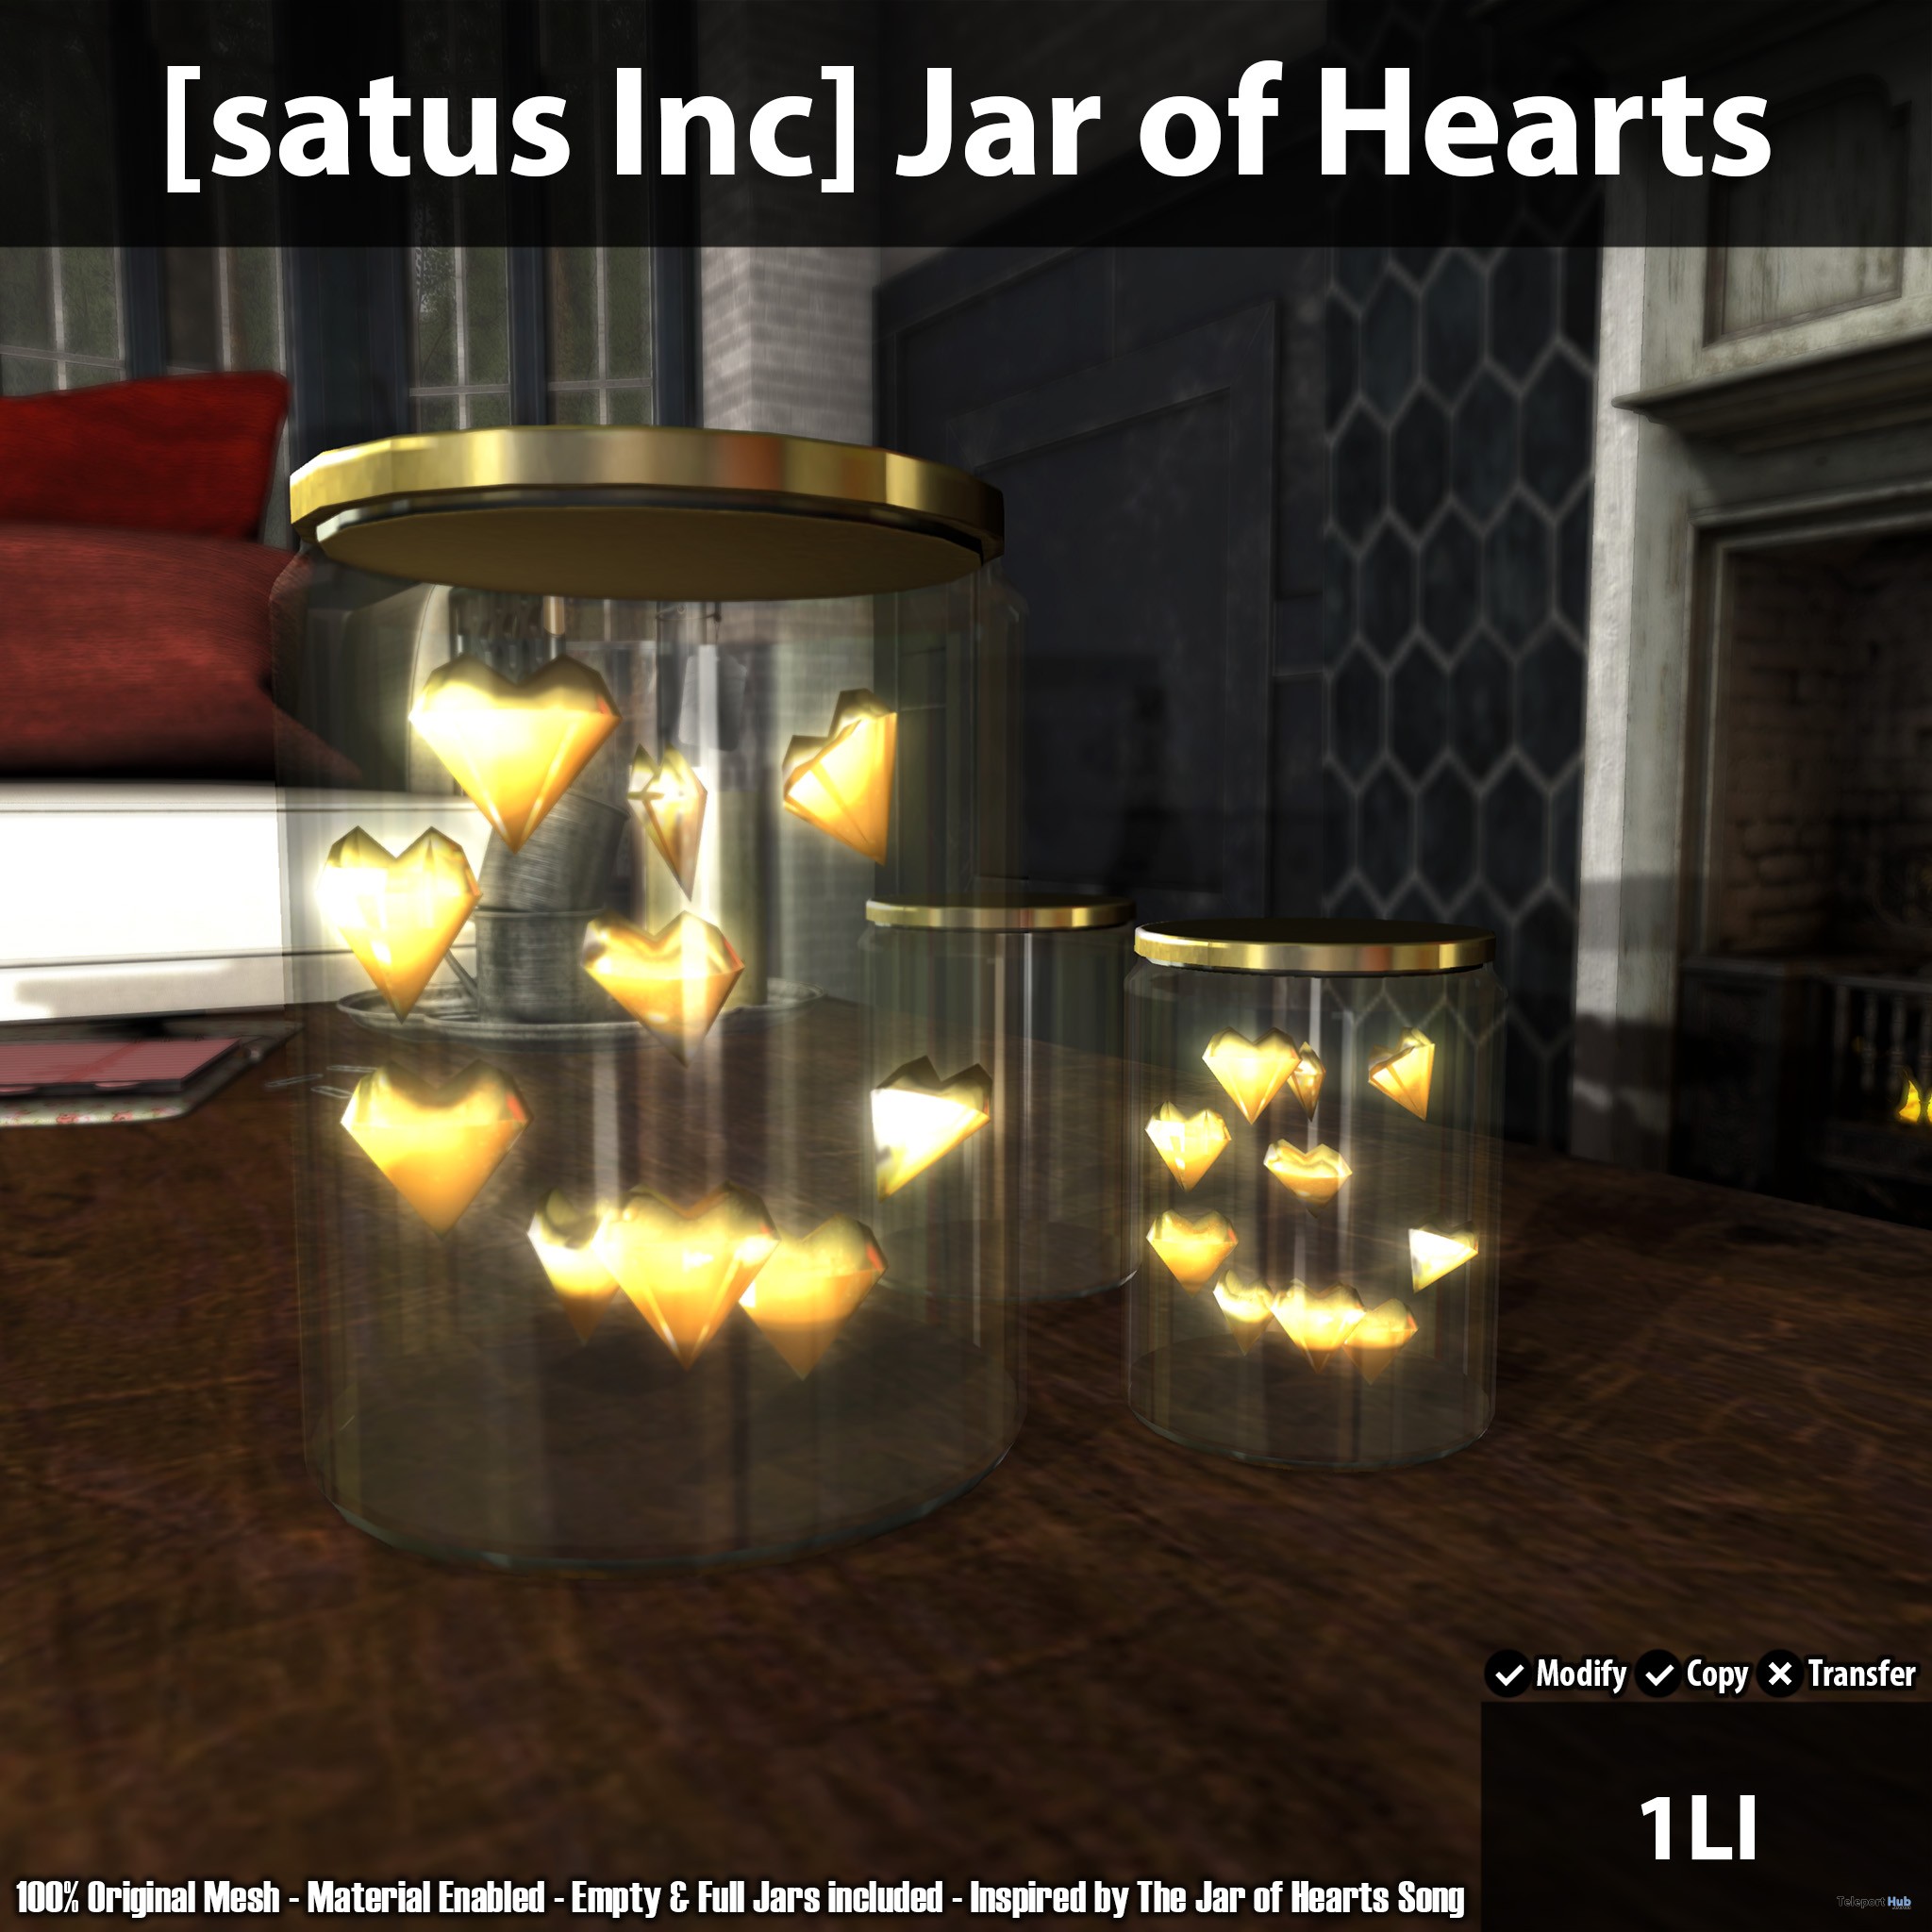 Jar of Hearts Teleport Hub Group Gift by [satus Inc] - Teleport Hub - teleporthub.com